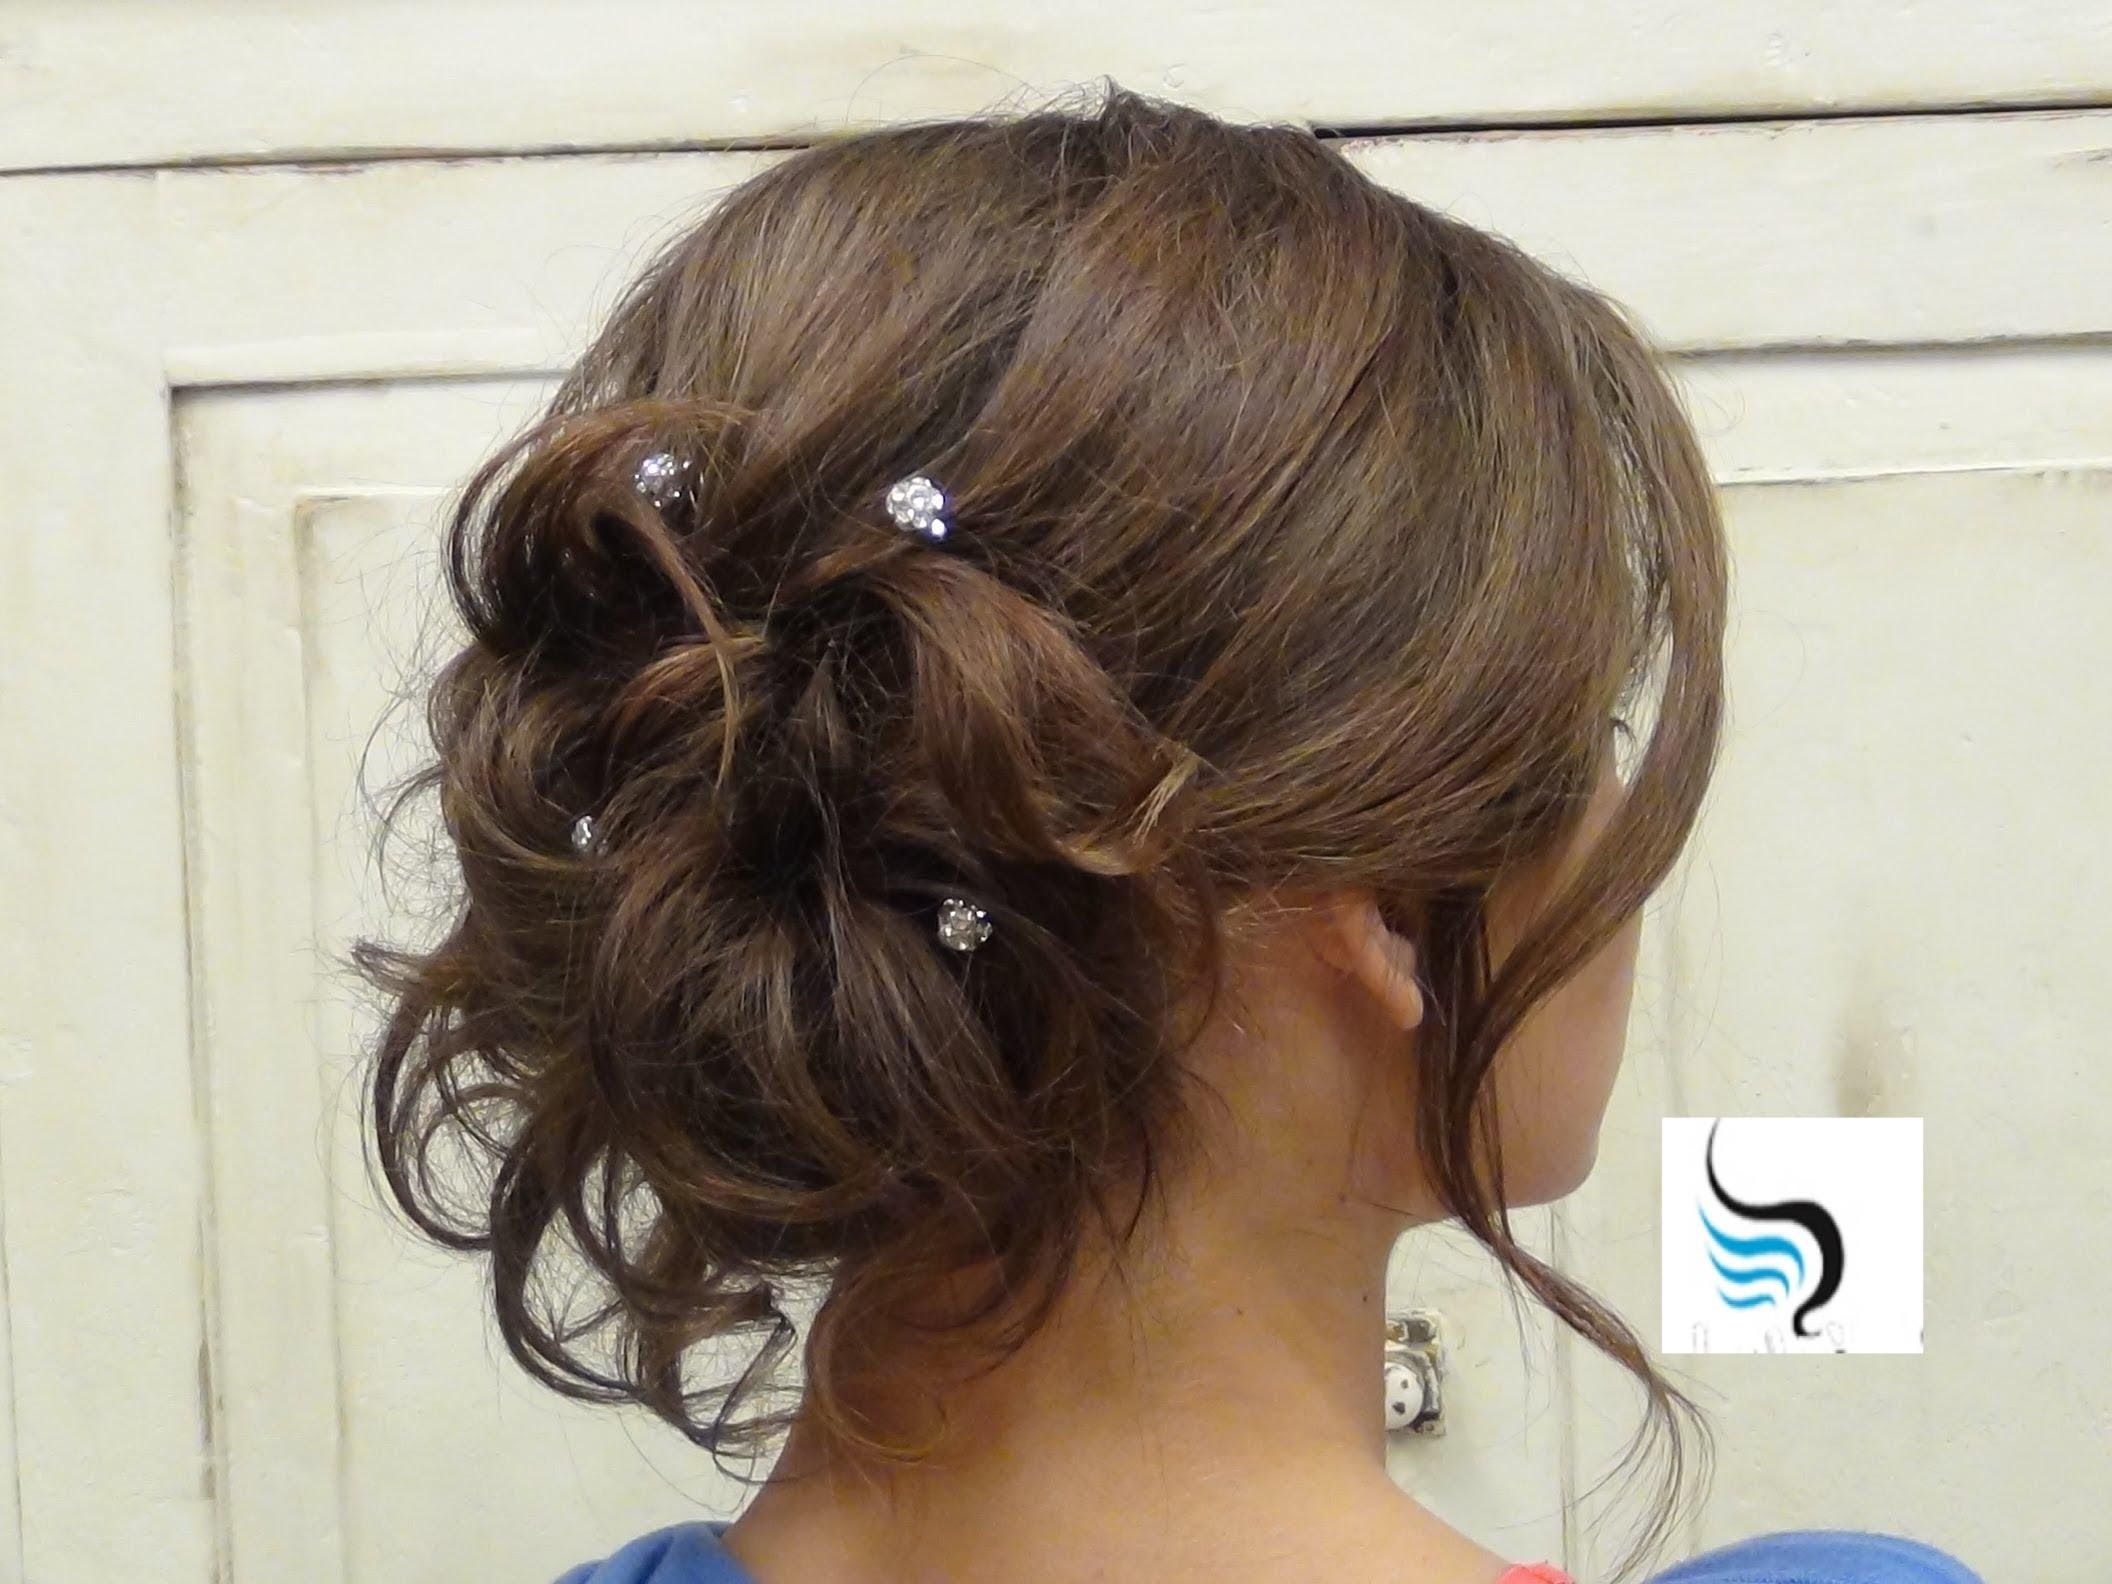 Favorite Wedding Hairstyles Up For Long Hair Pertaining To Soft Curled Updo) For Long Hair Prom Or Wedding Hairstyles – Youtube (View 15 of 15)